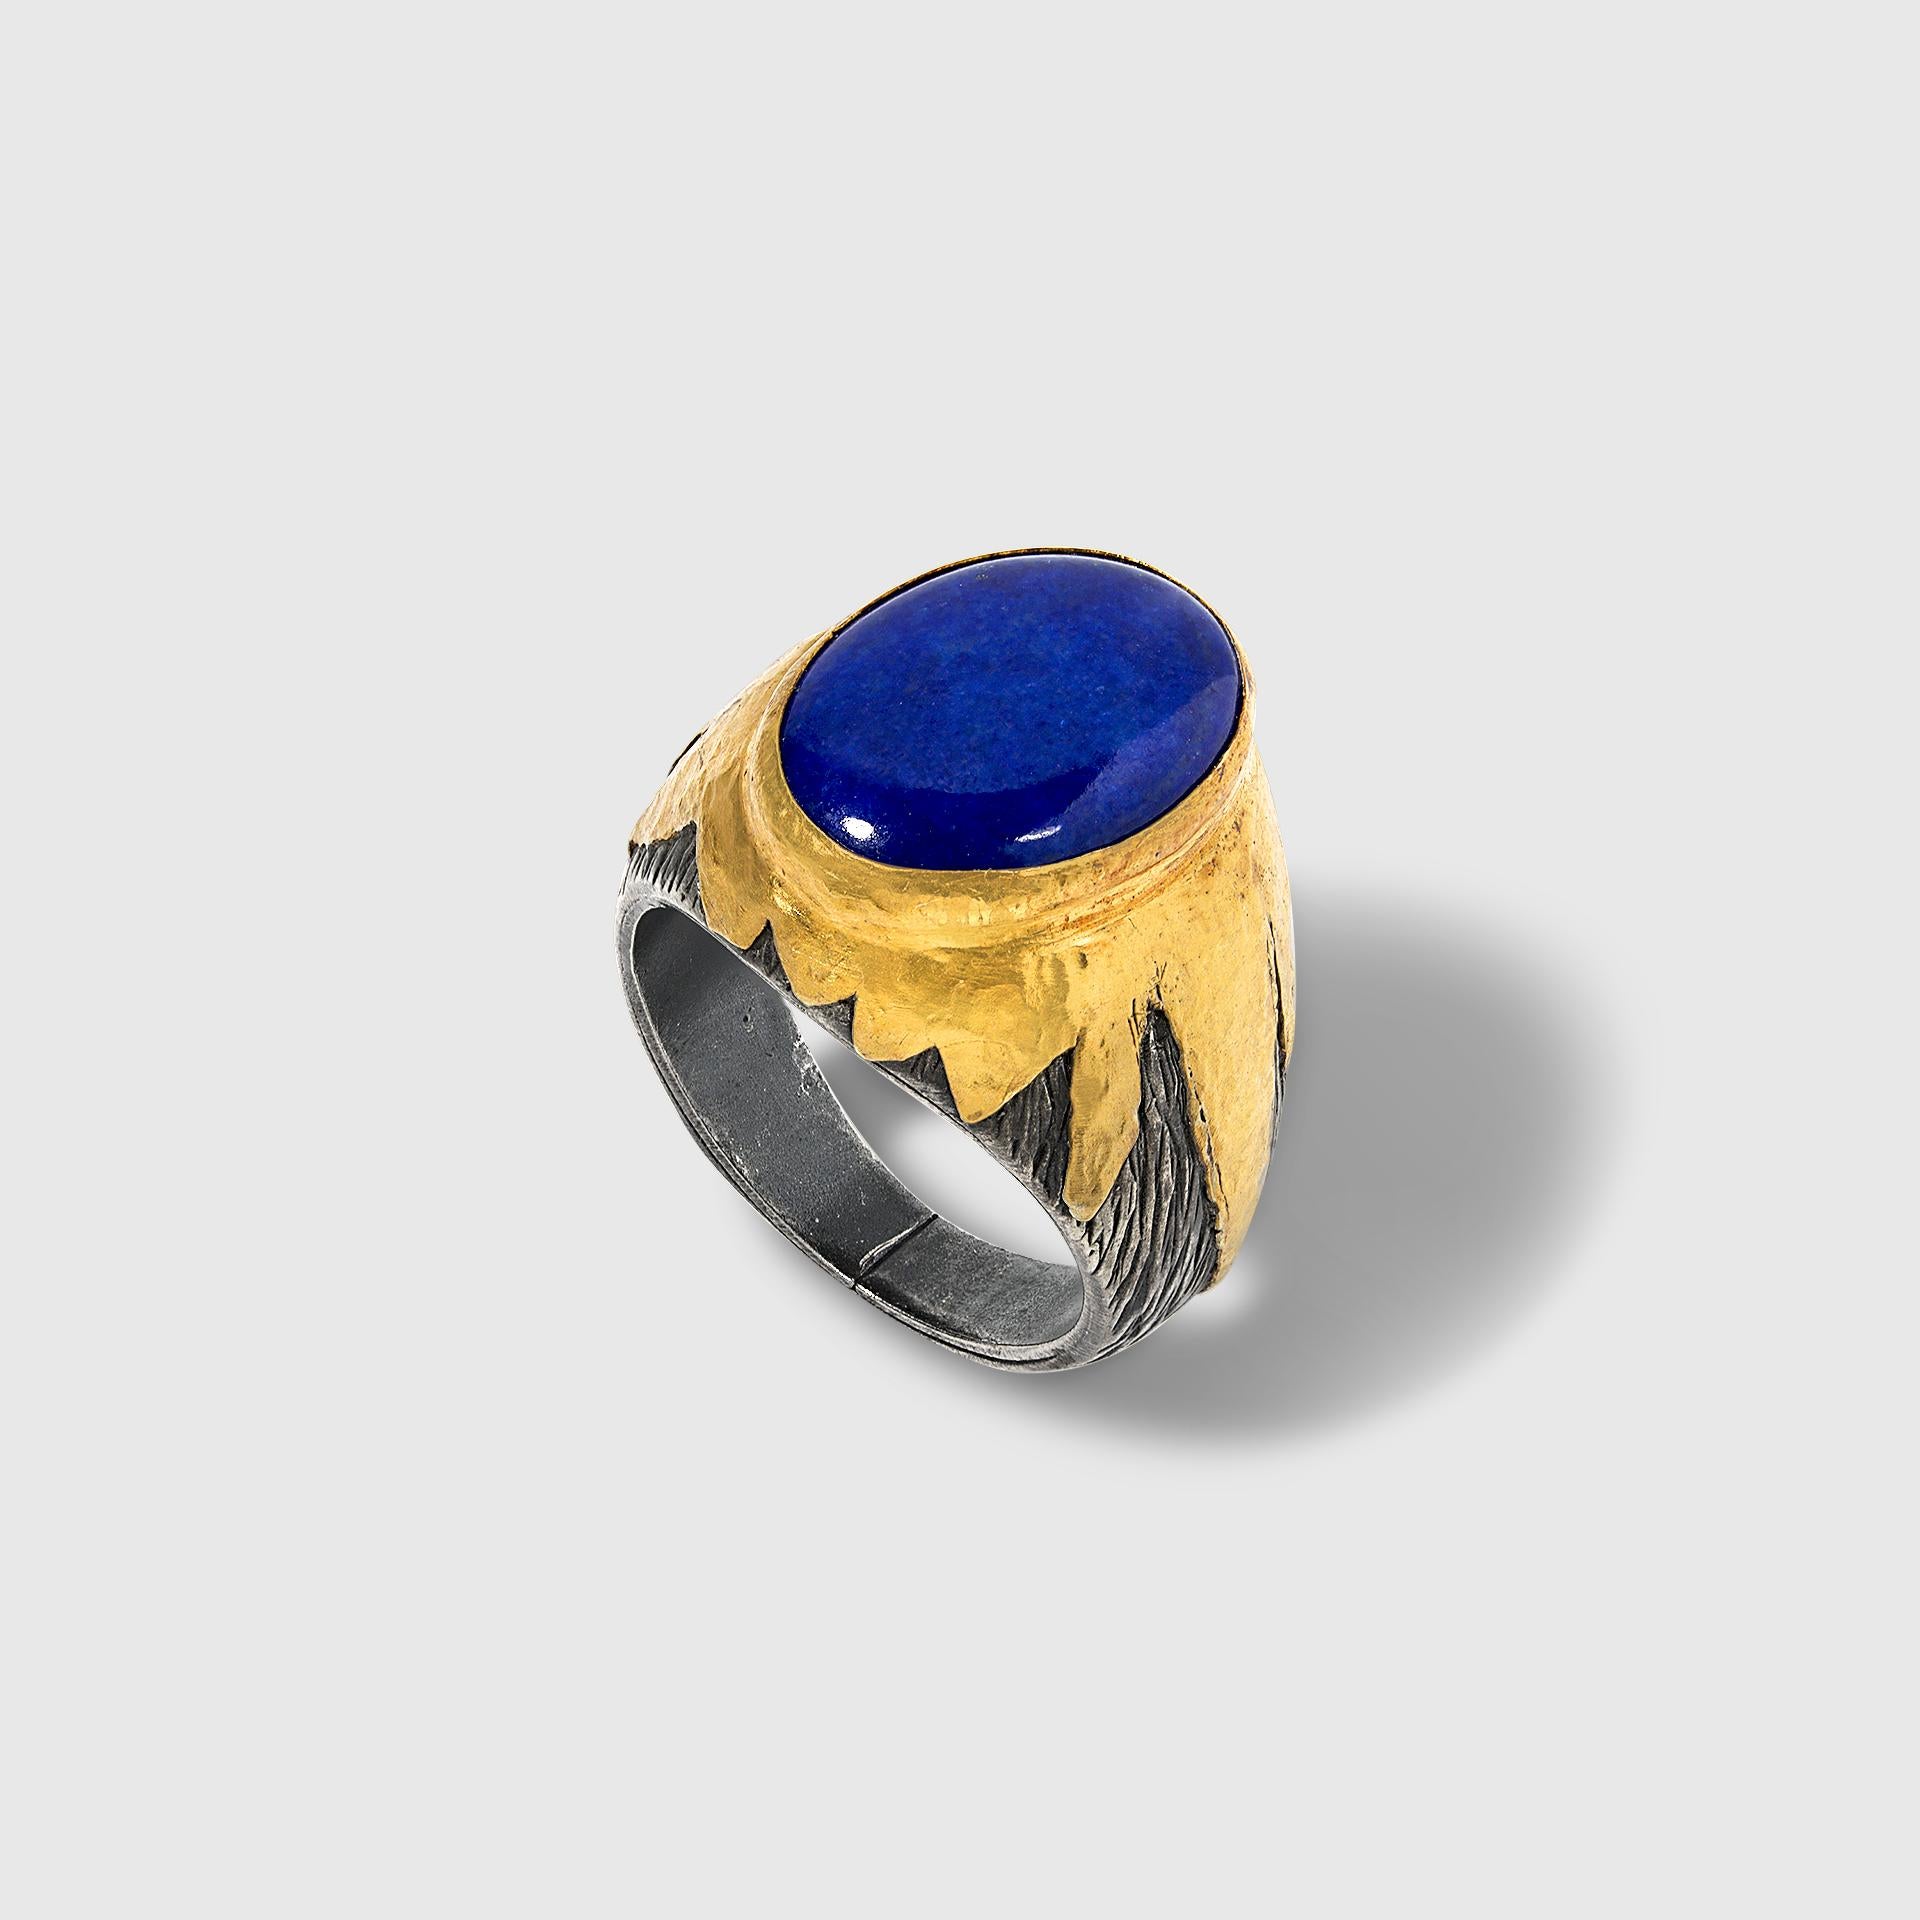 Large Oval Lapis Lazuli w/ 24K Gold & Silver Textured Cocktail Ring For Sale 1